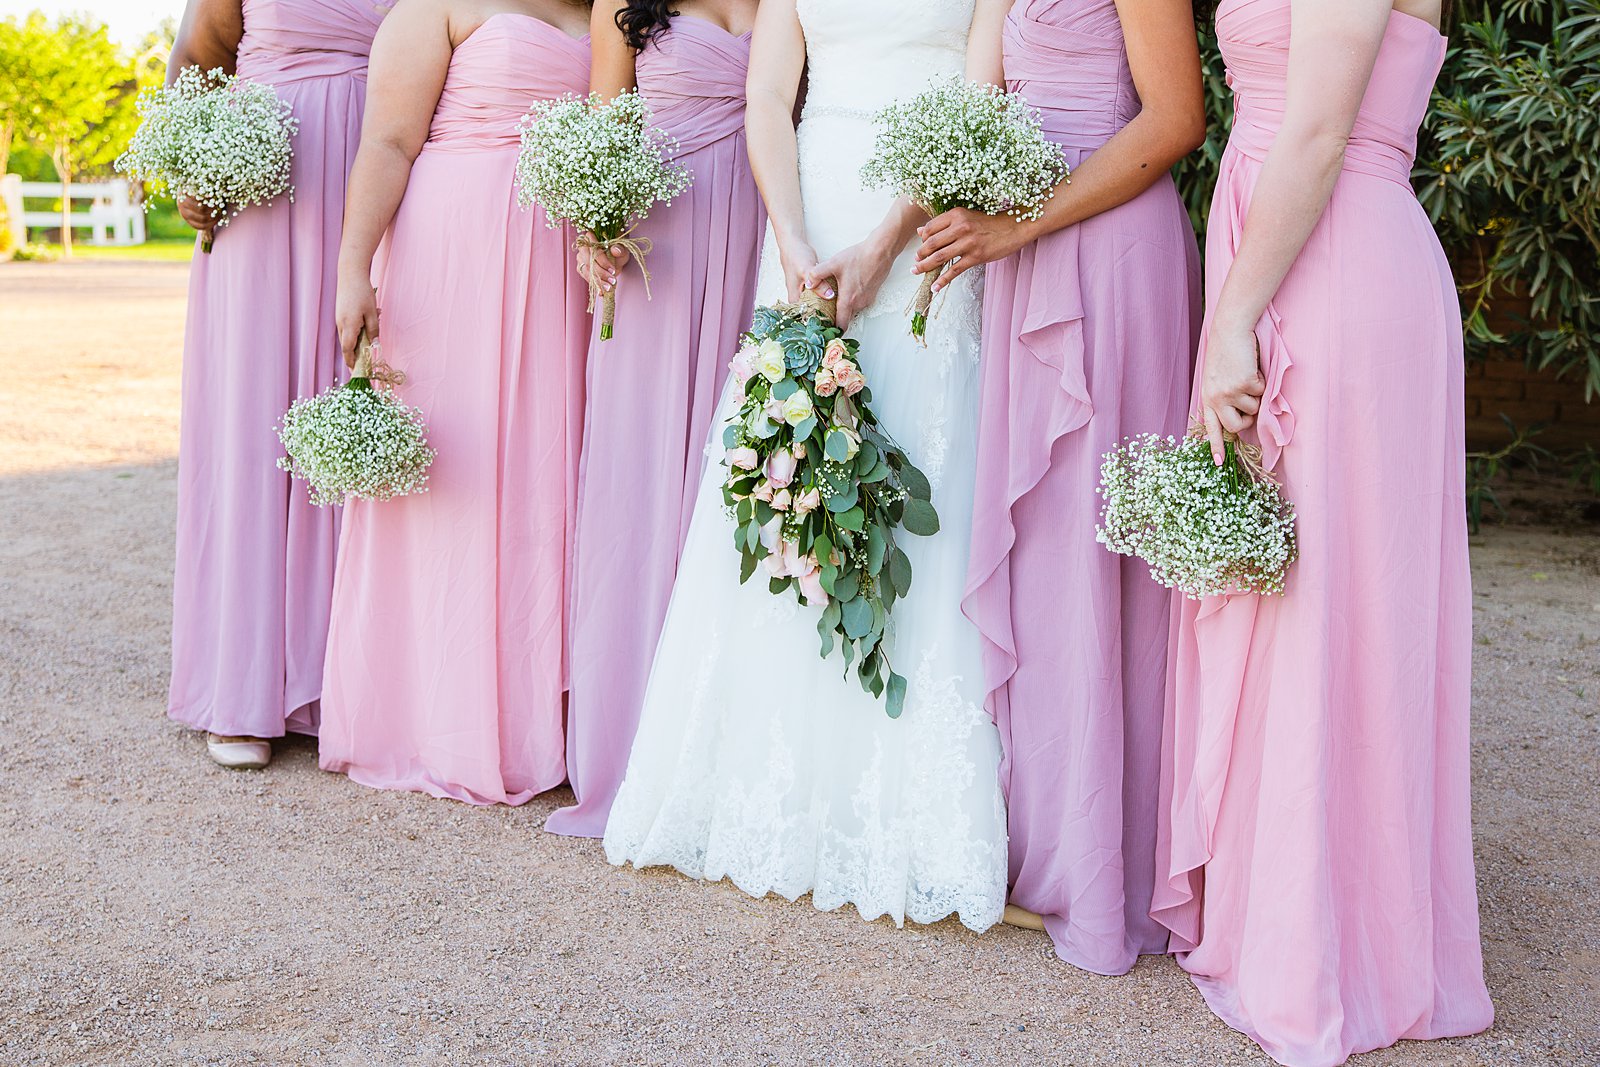 Bride and bridesmaids outfit details by PMA Photography.